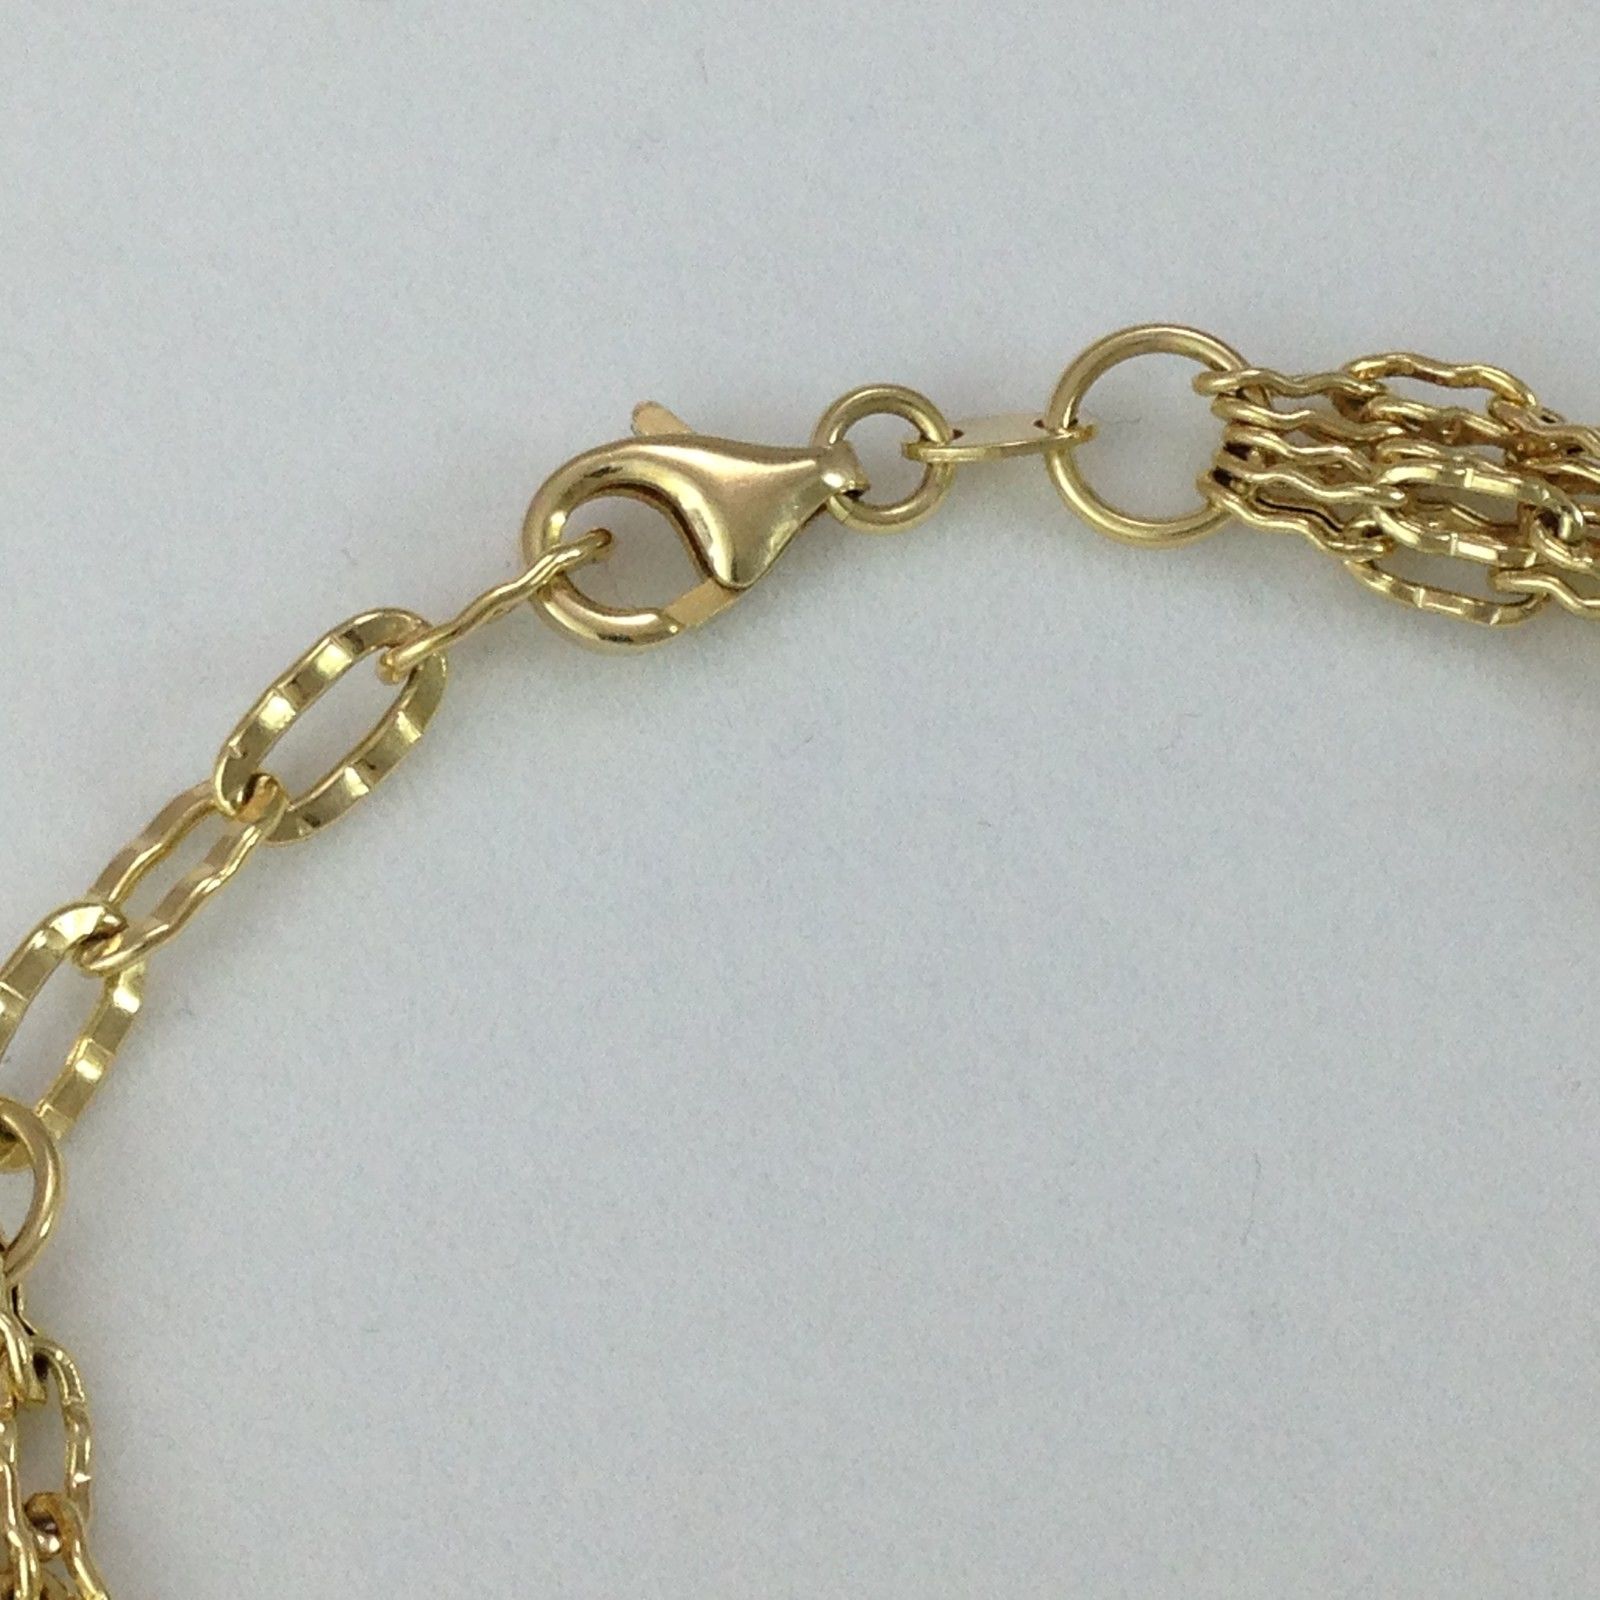 Genuine 14K Yellow Gold Adjustable Bracelet 7-8 inches $775 -  6.8 gr. NWT